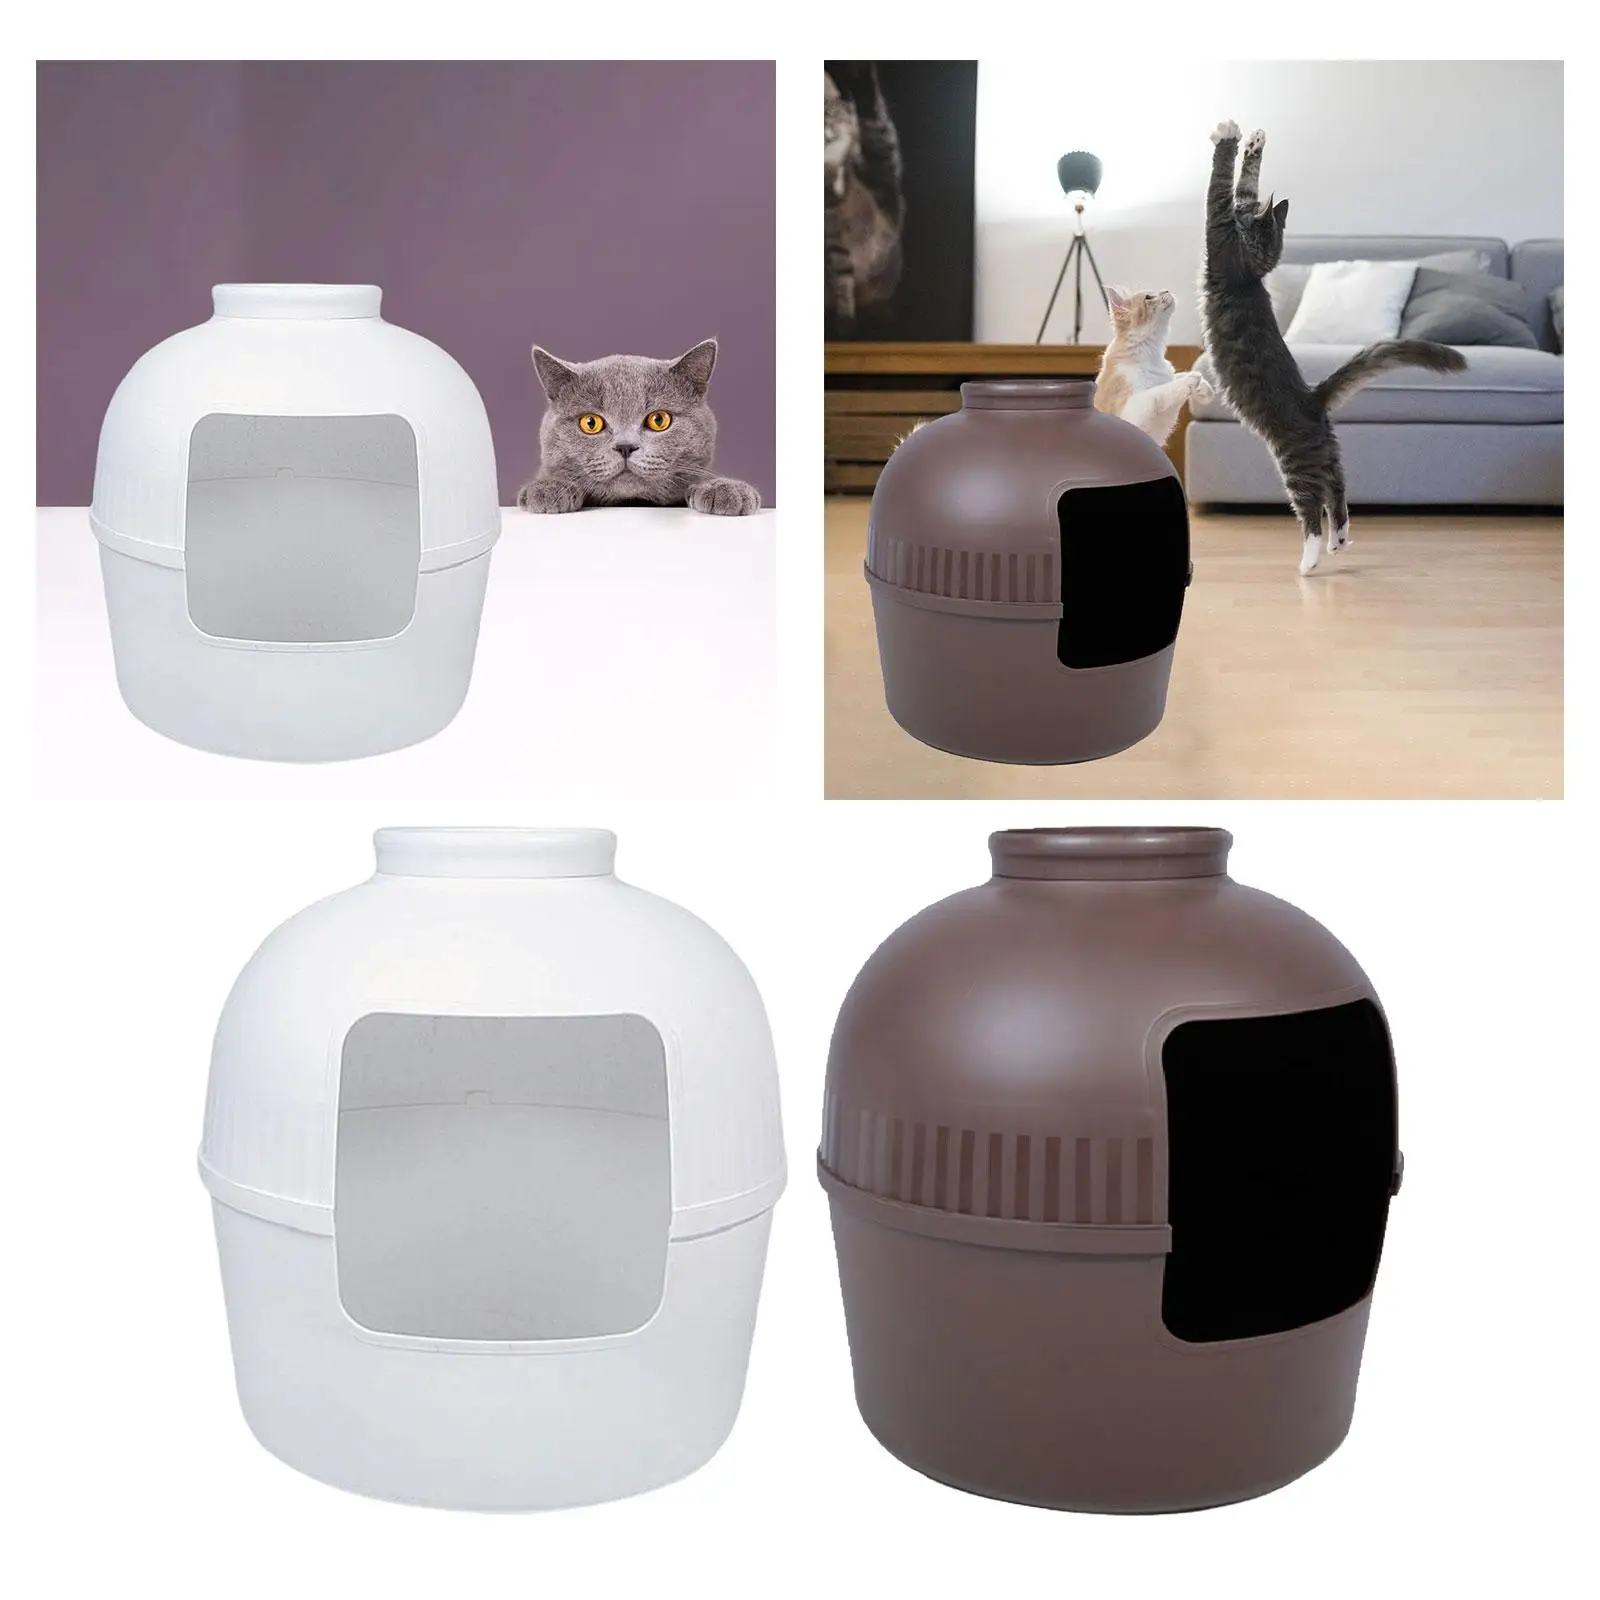 litter Box Plant Litter Boxes Enclosed Cat Litter Box Pet Supplies Cute for Large Cat Small Cat Home Decor Training Gift